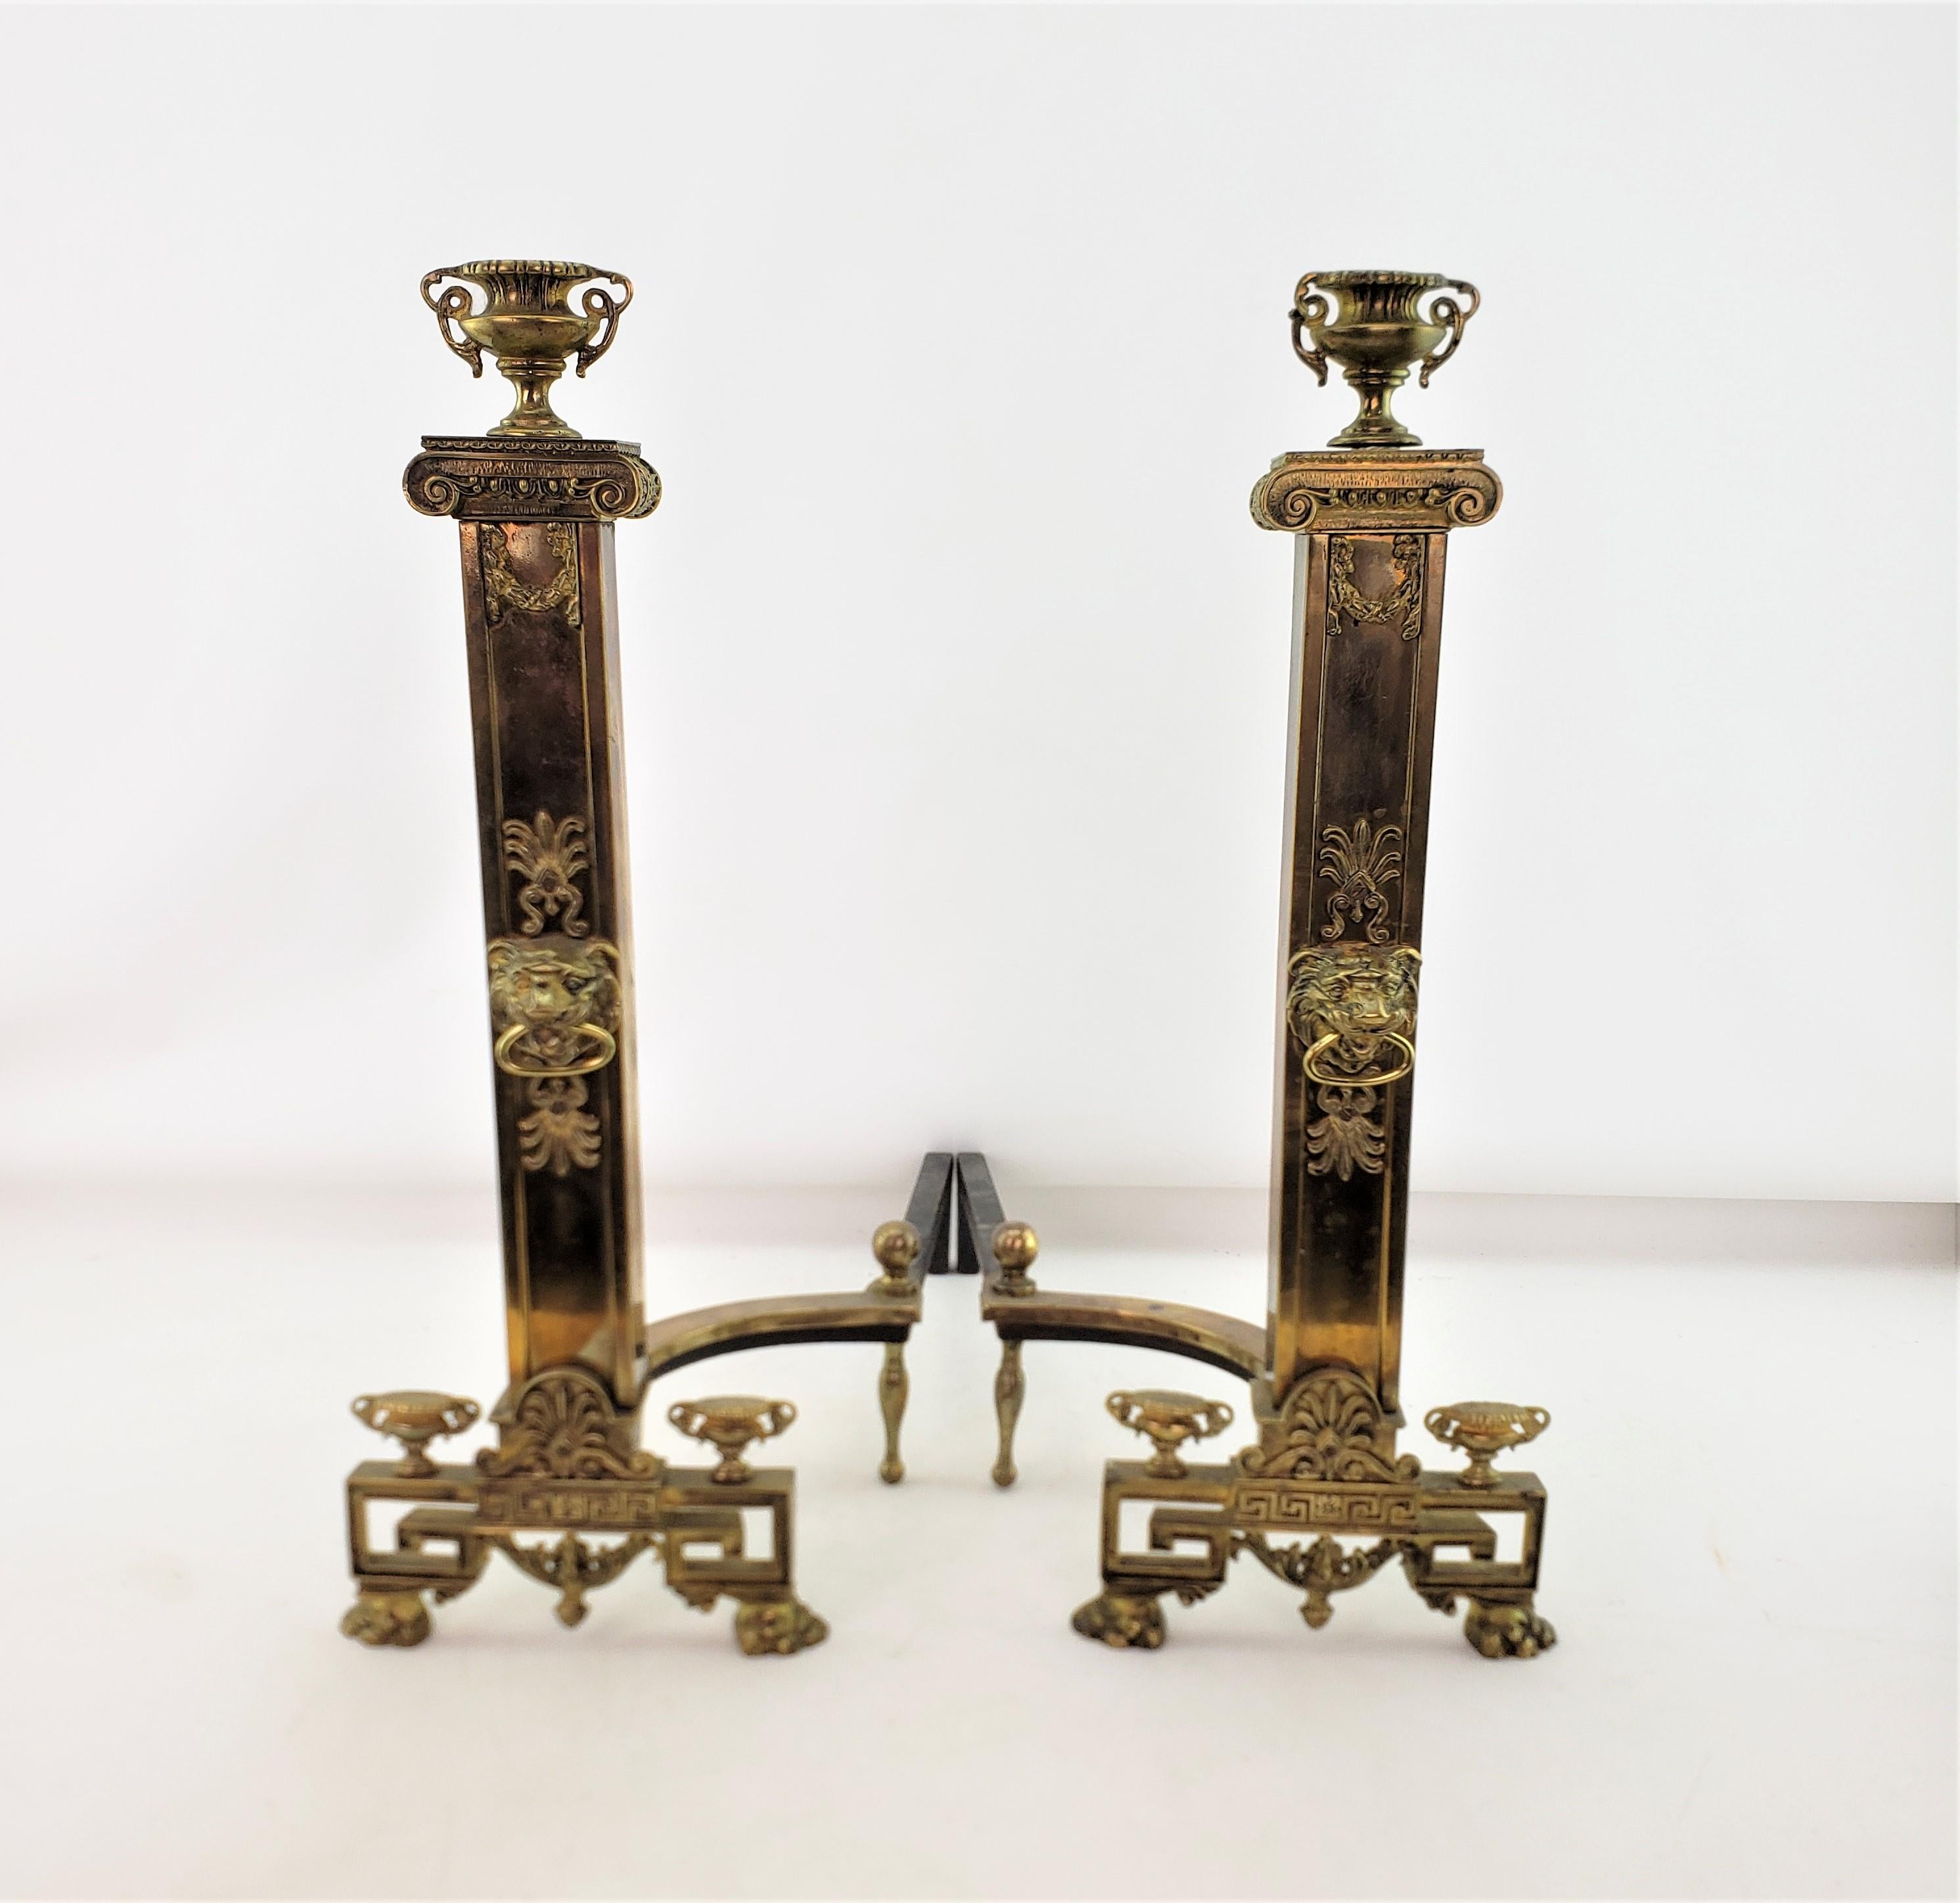 Neoclassical Revival Antique Neoclassical Styled Andirons with Brass Urns & Lion Head Accents For Sale